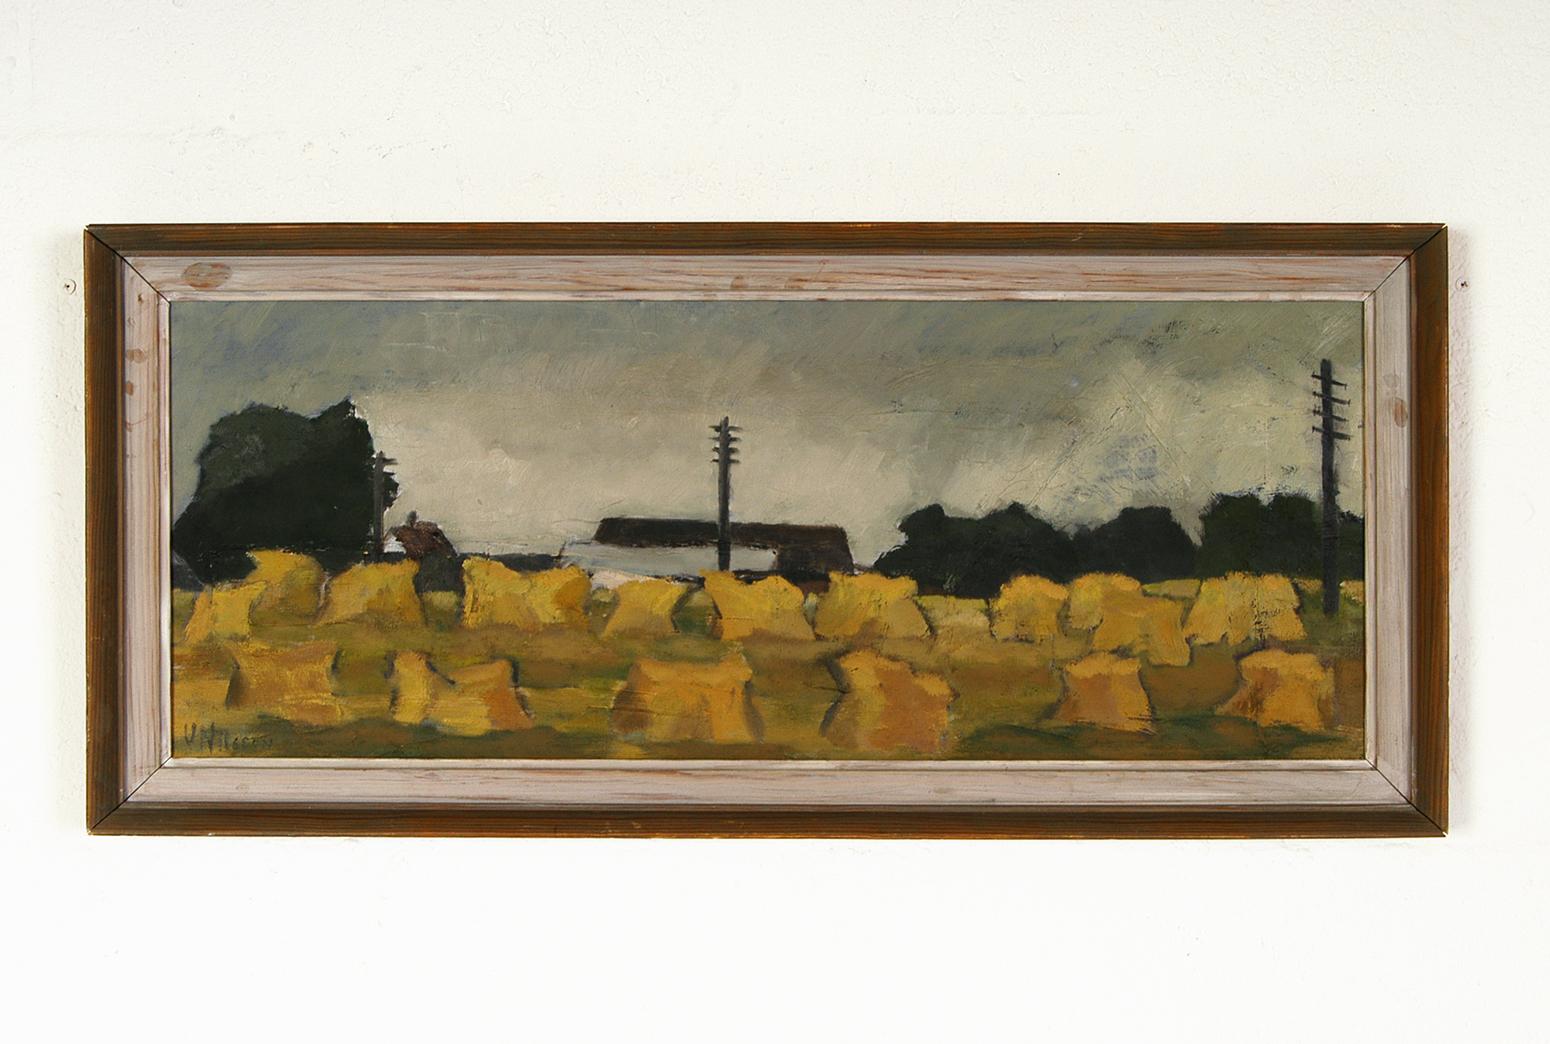 An original oil on canvas painting depicting a typical rural summer scene of haystacks in a field. Signed V. Nilsson and untitled. No visible damage or losses, and retains its original wooden frame.
   